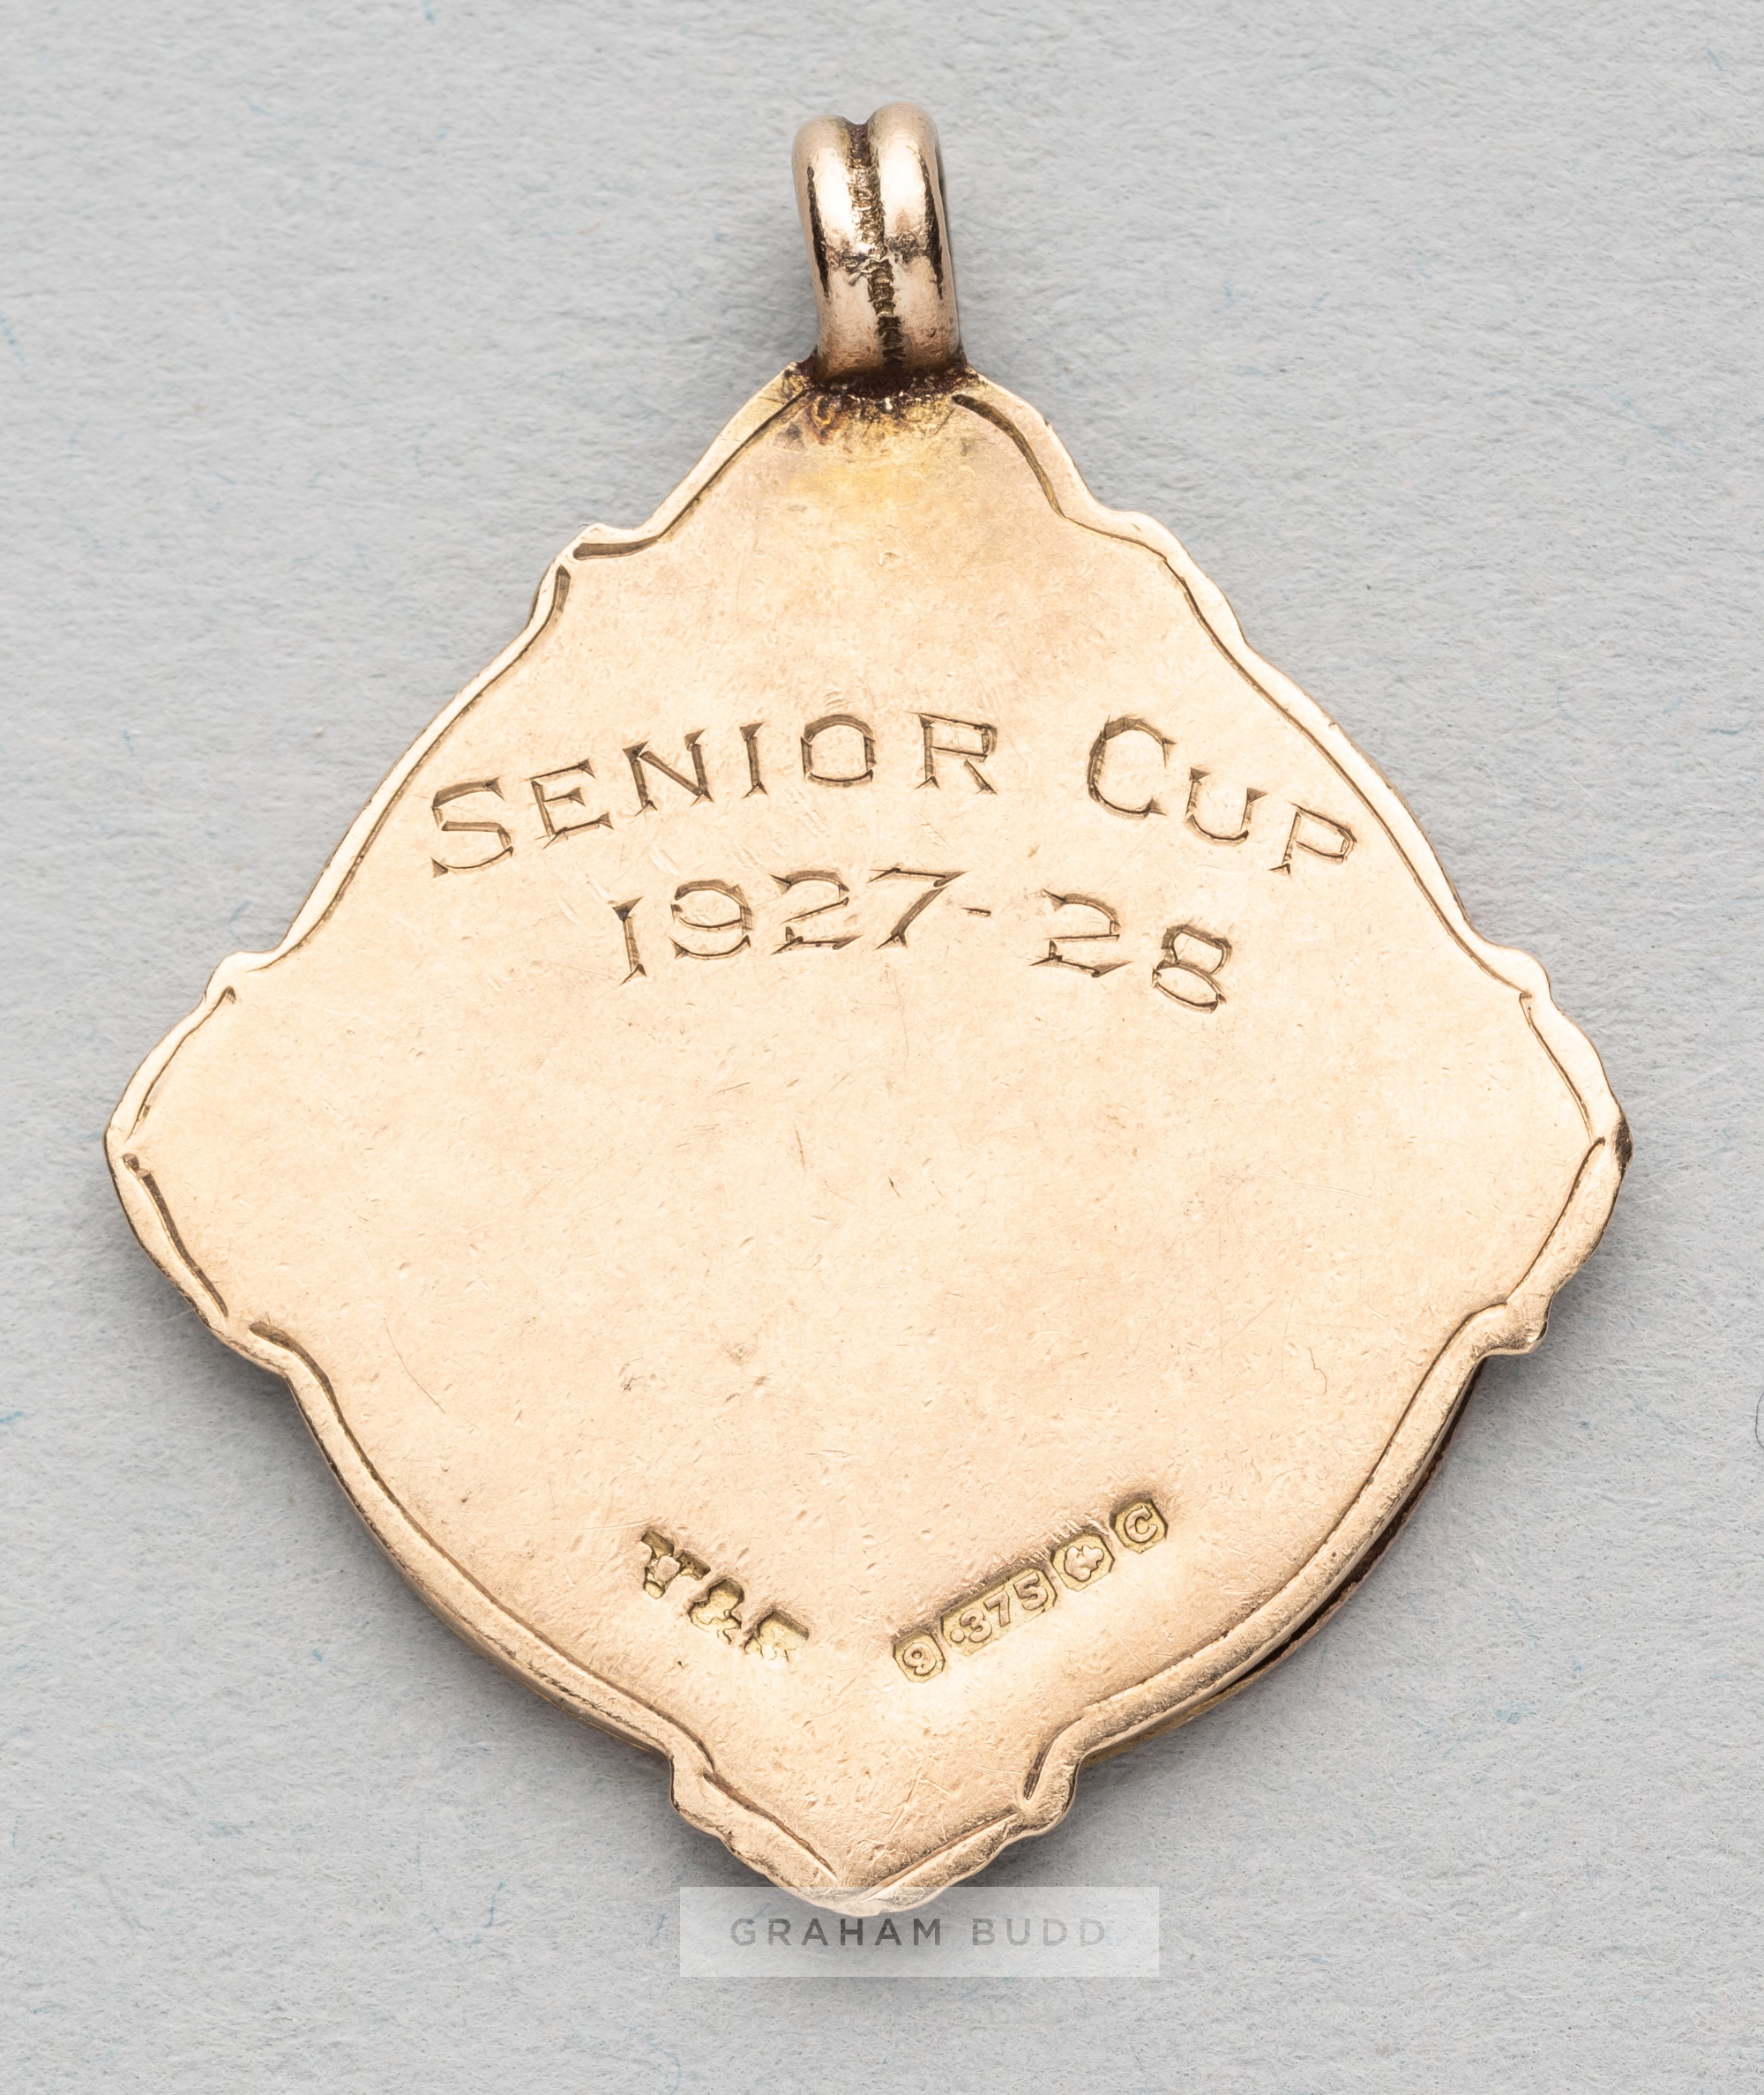 Suffolk County Football Association Senior Cup winner's medal awarded to an Ipswich Town player, - Image 2 of 2